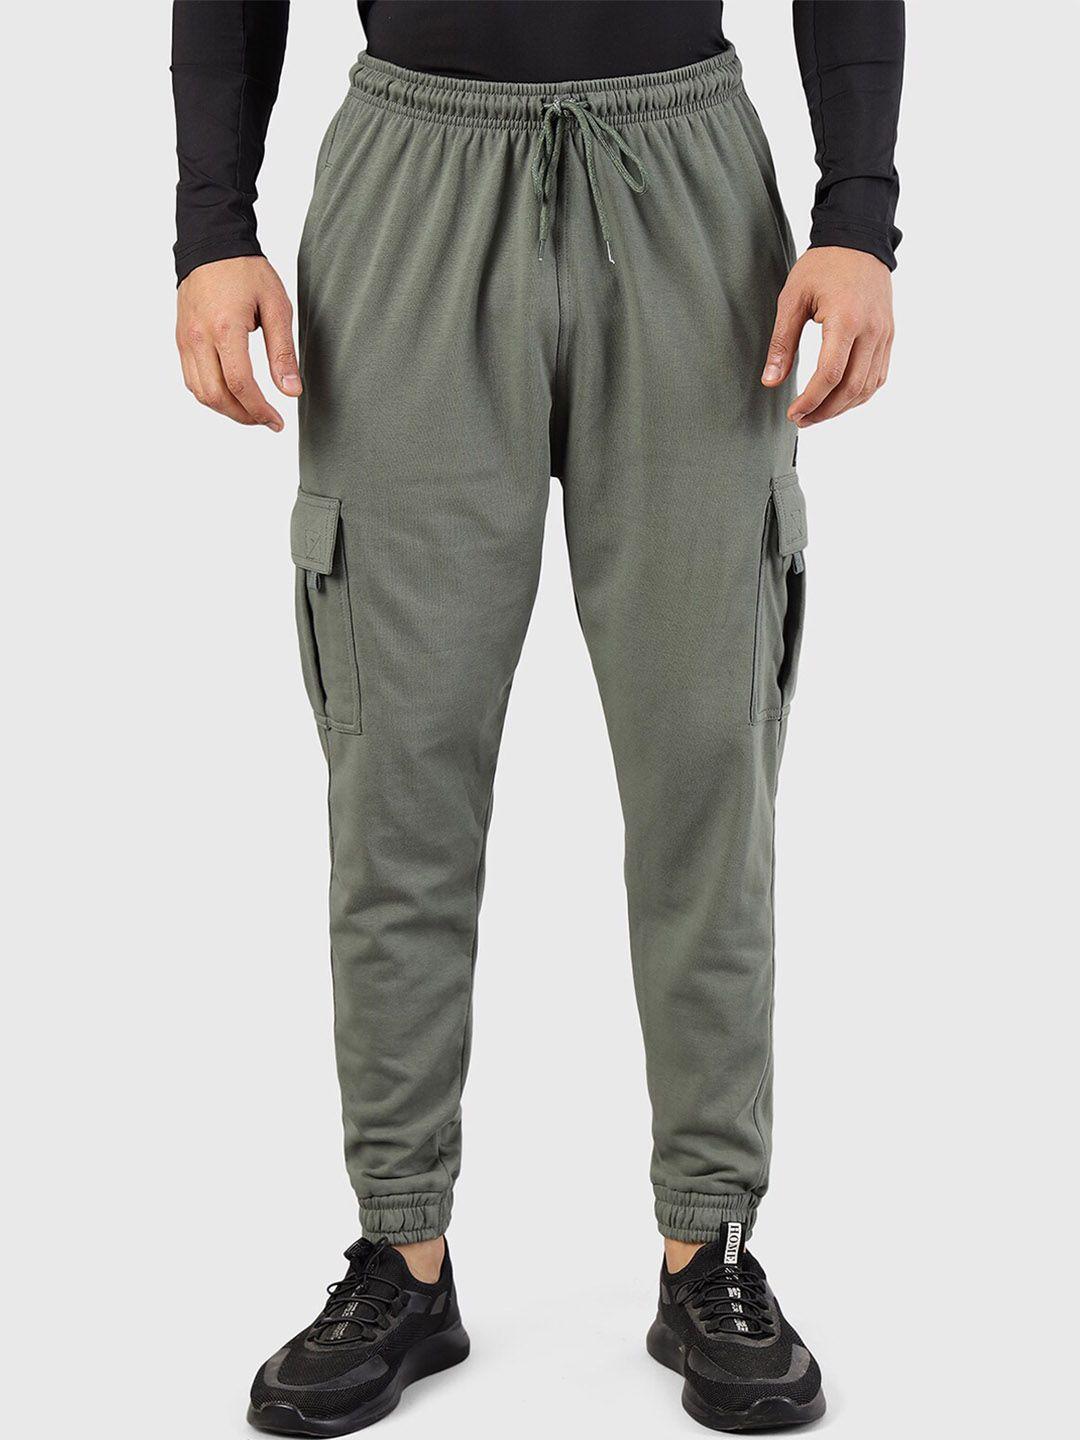 fuaark-men-flex-relaxed-fit-mid-rise-antimicrobial-sports-joggers